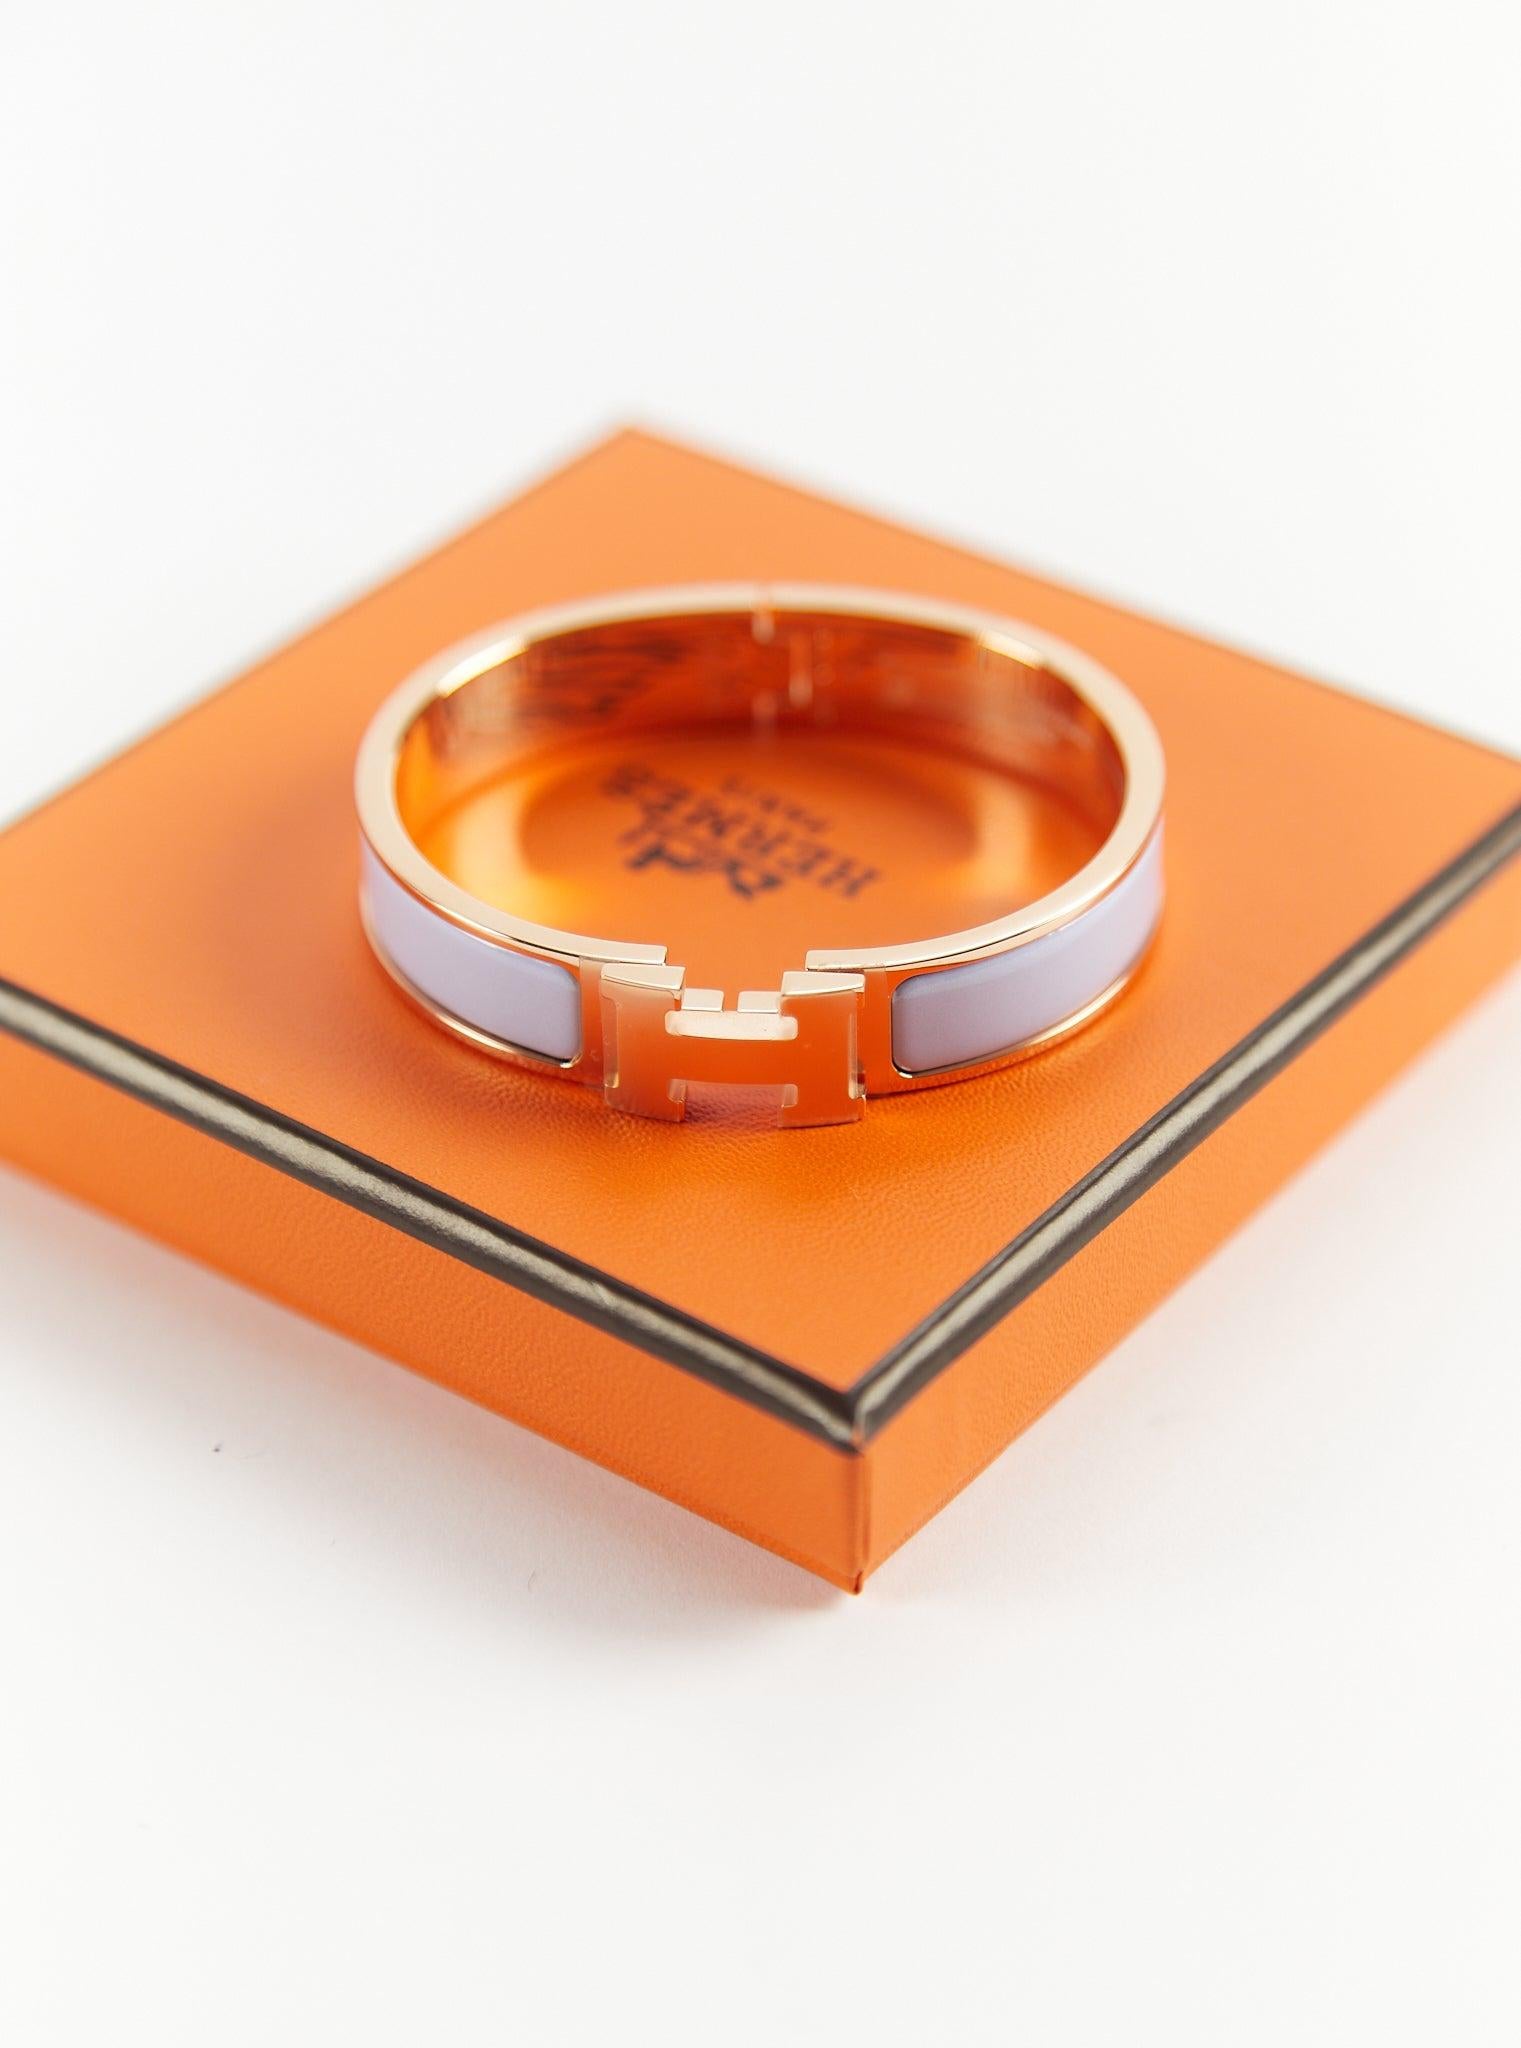 Hermès Clic H PM Bracelet in Parme and Rose Gold

Wrist size: 16.8 cm  Width: 12 mm

Made in France

